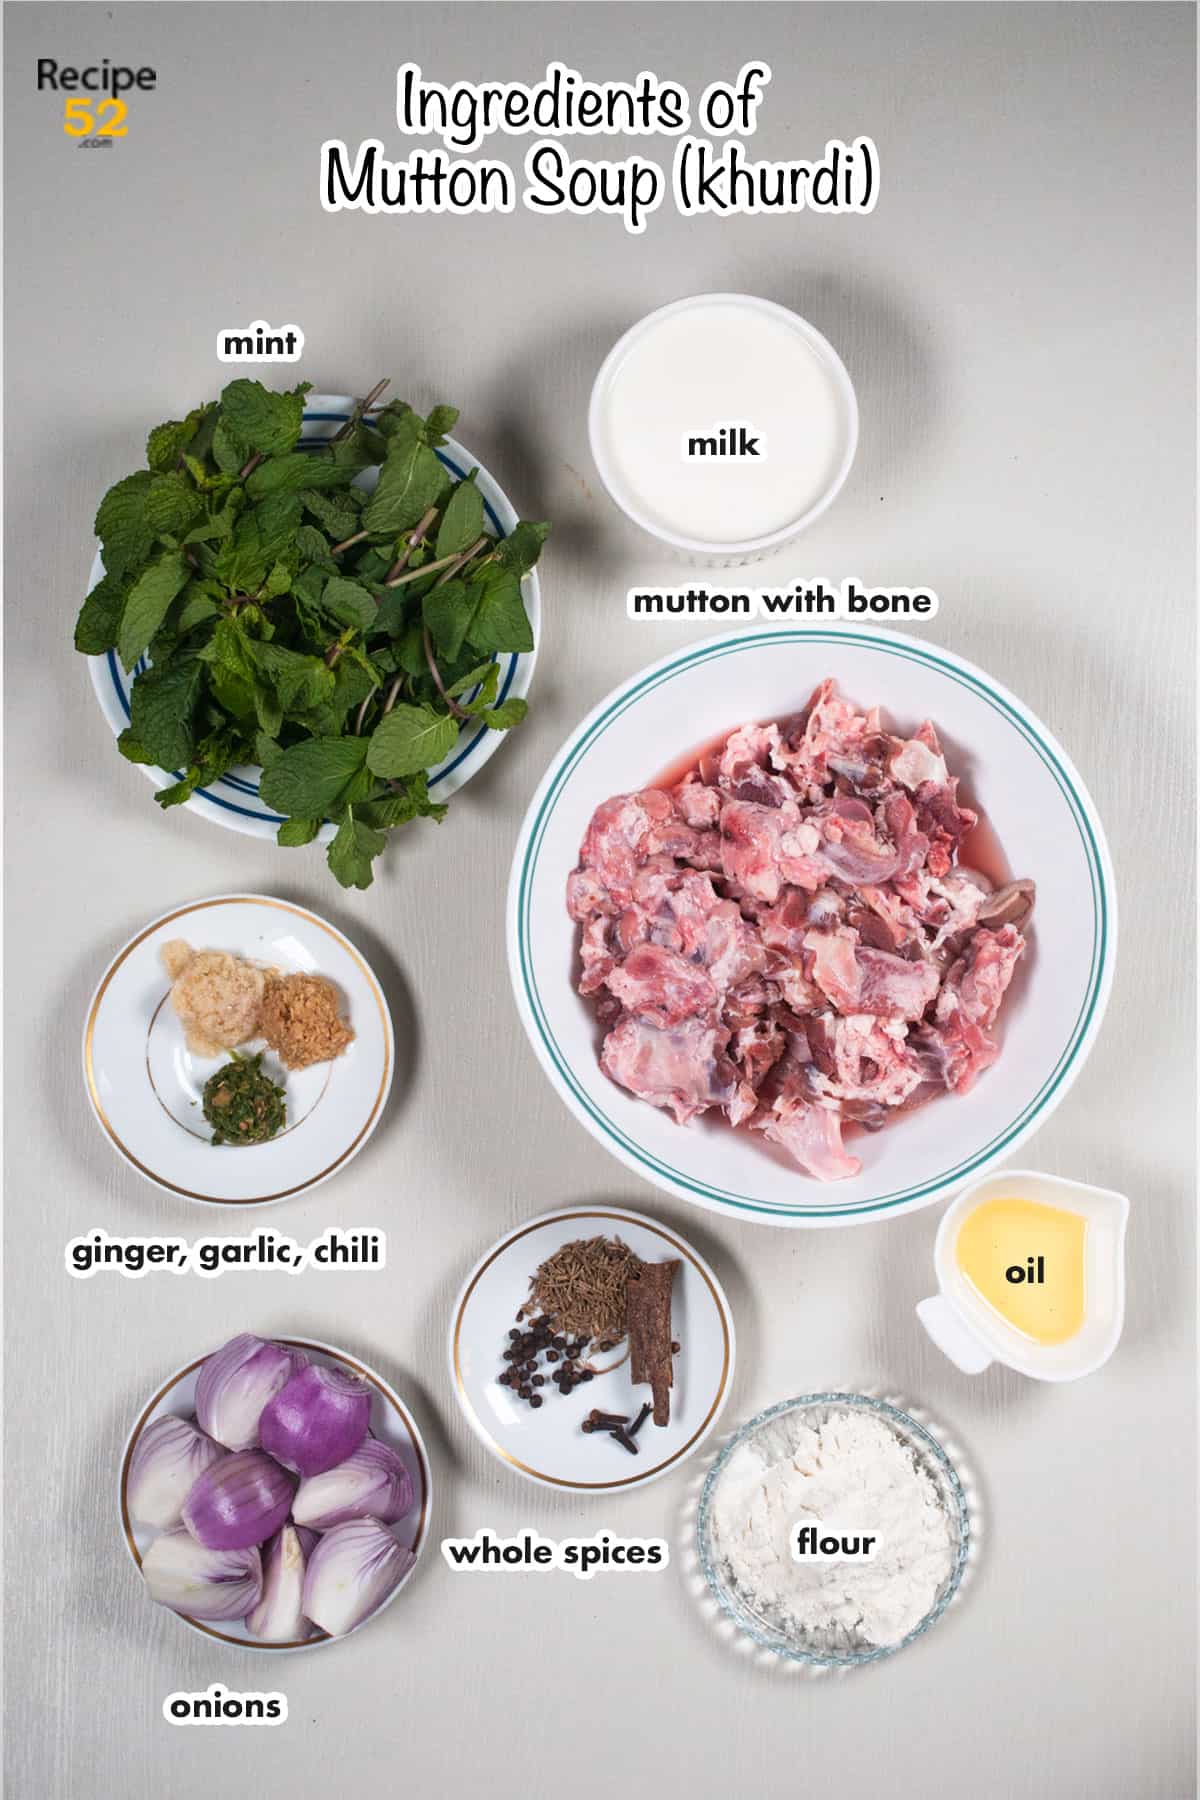 Ingredients of mutton soup placed on a white table.